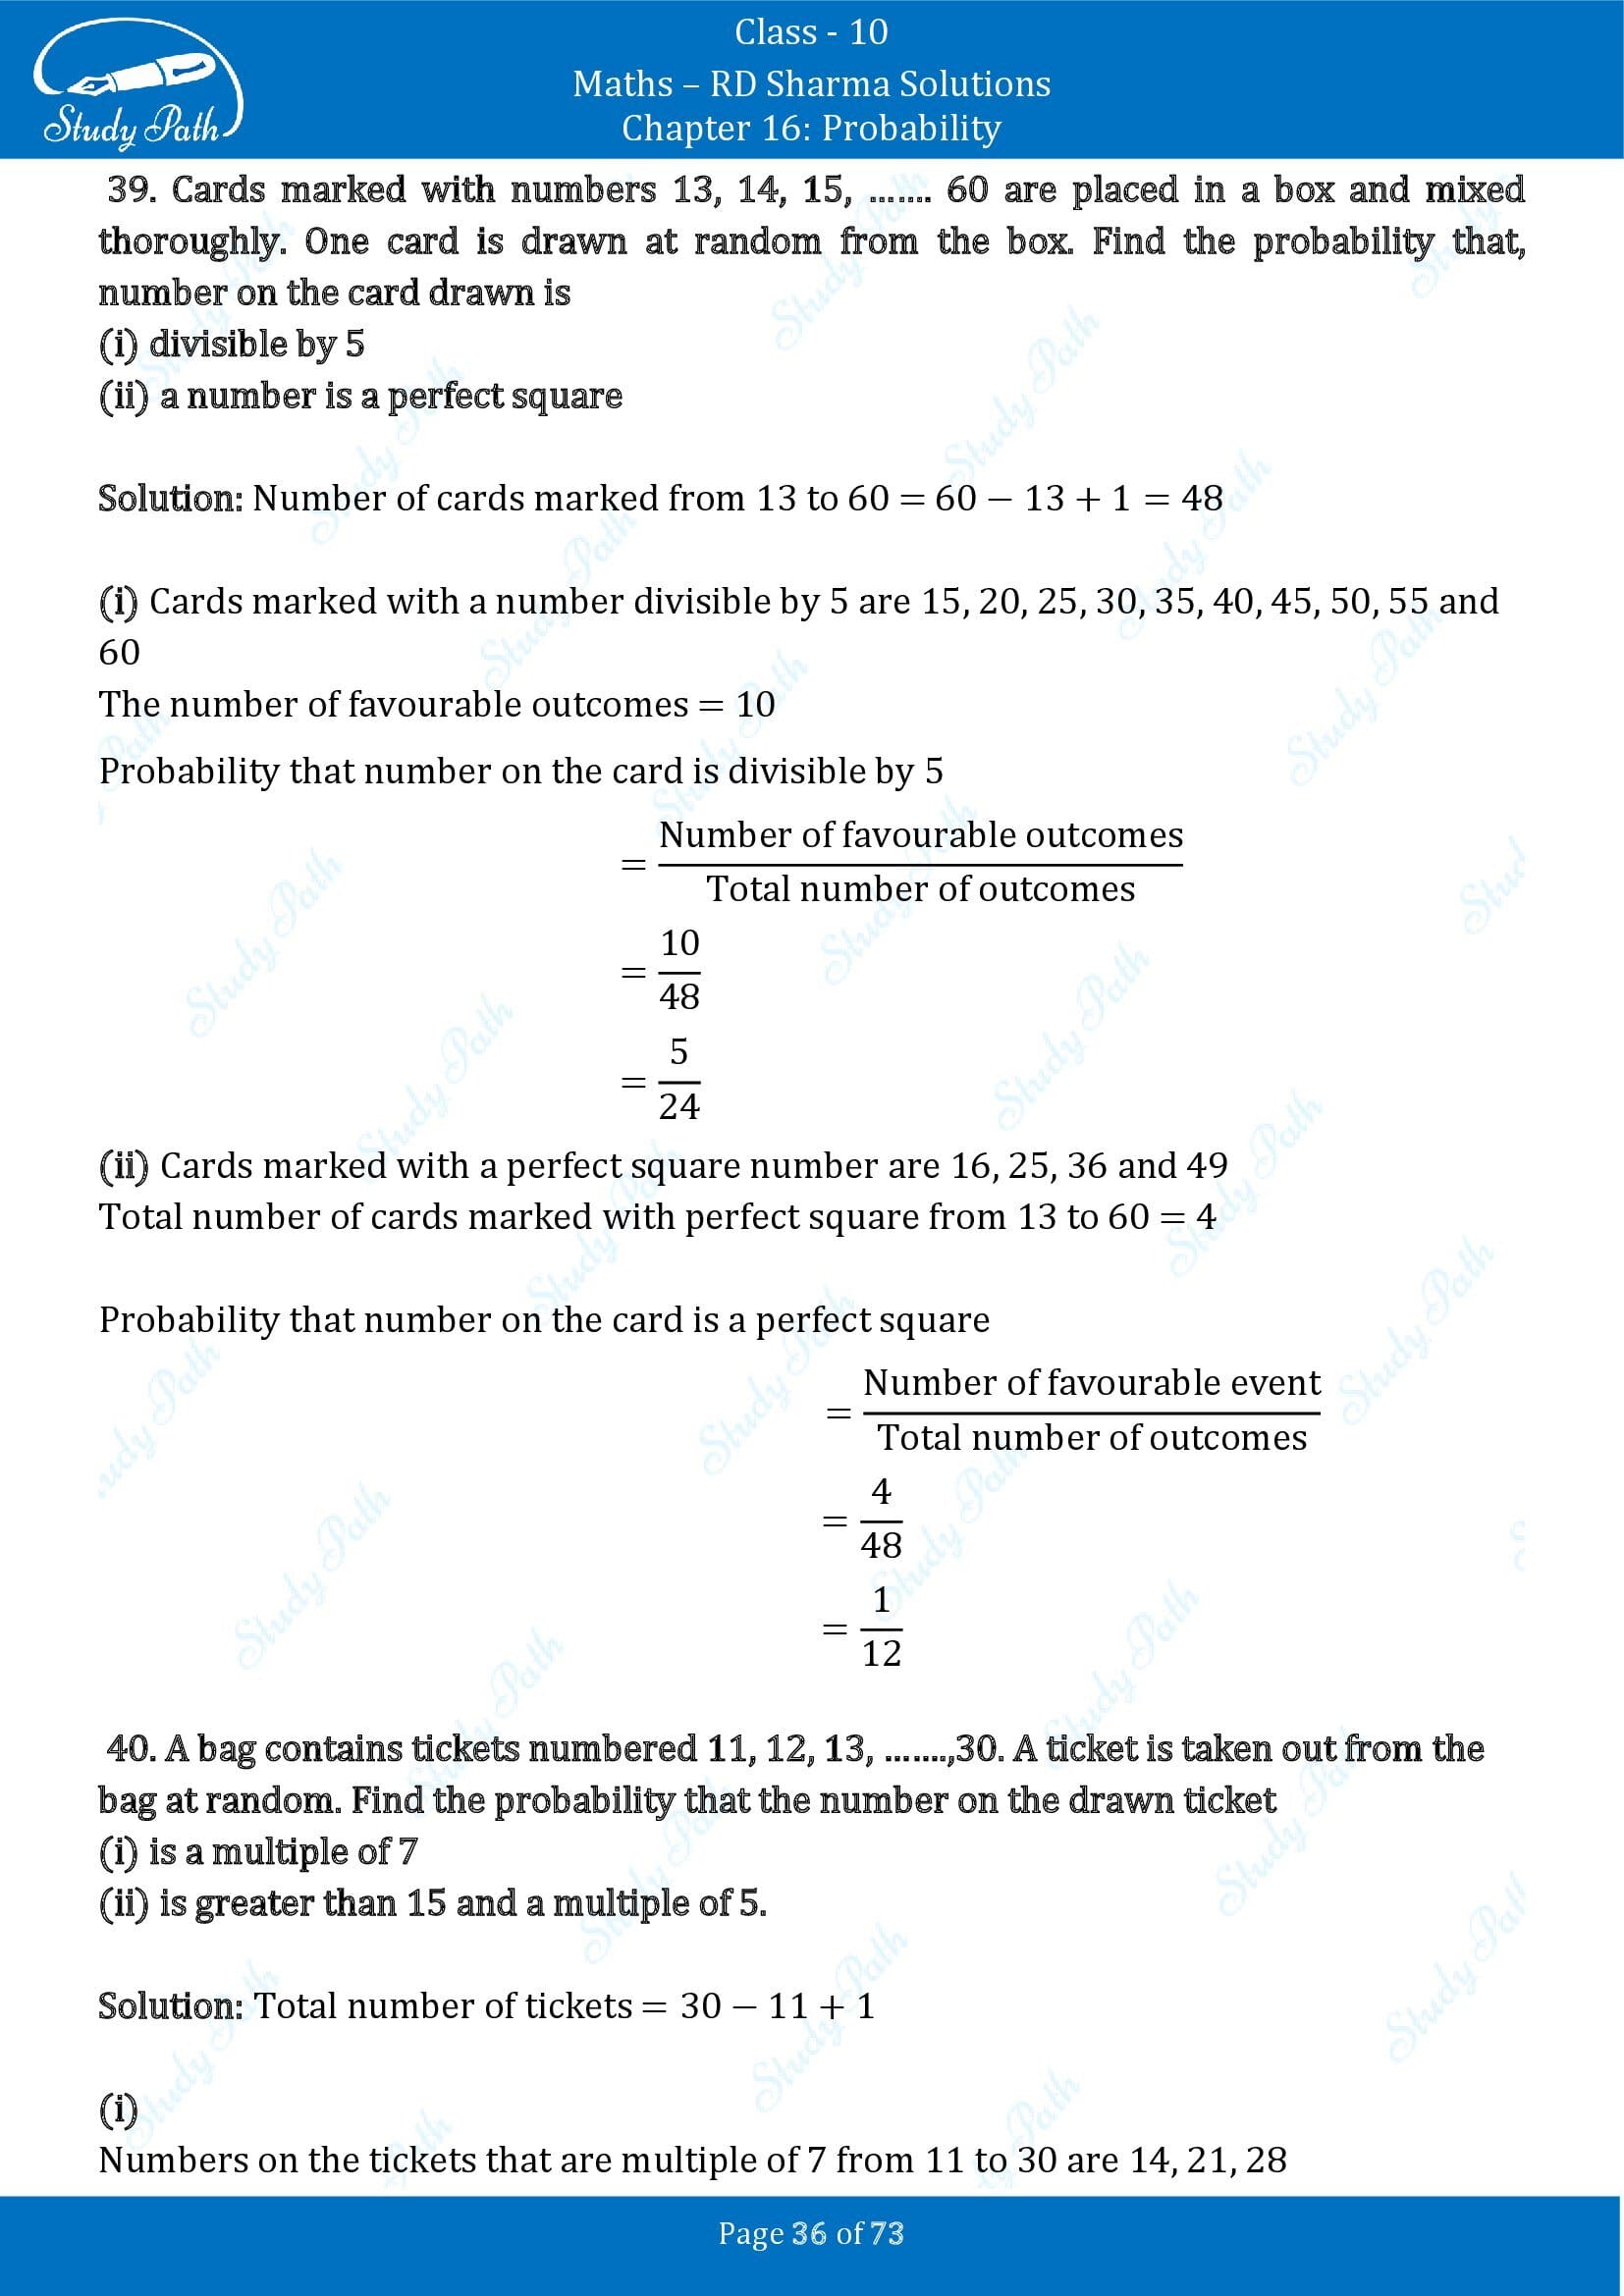 RD Sharma Solutions Class 10 Chapter 16 Probability Exercise 16.1 00036